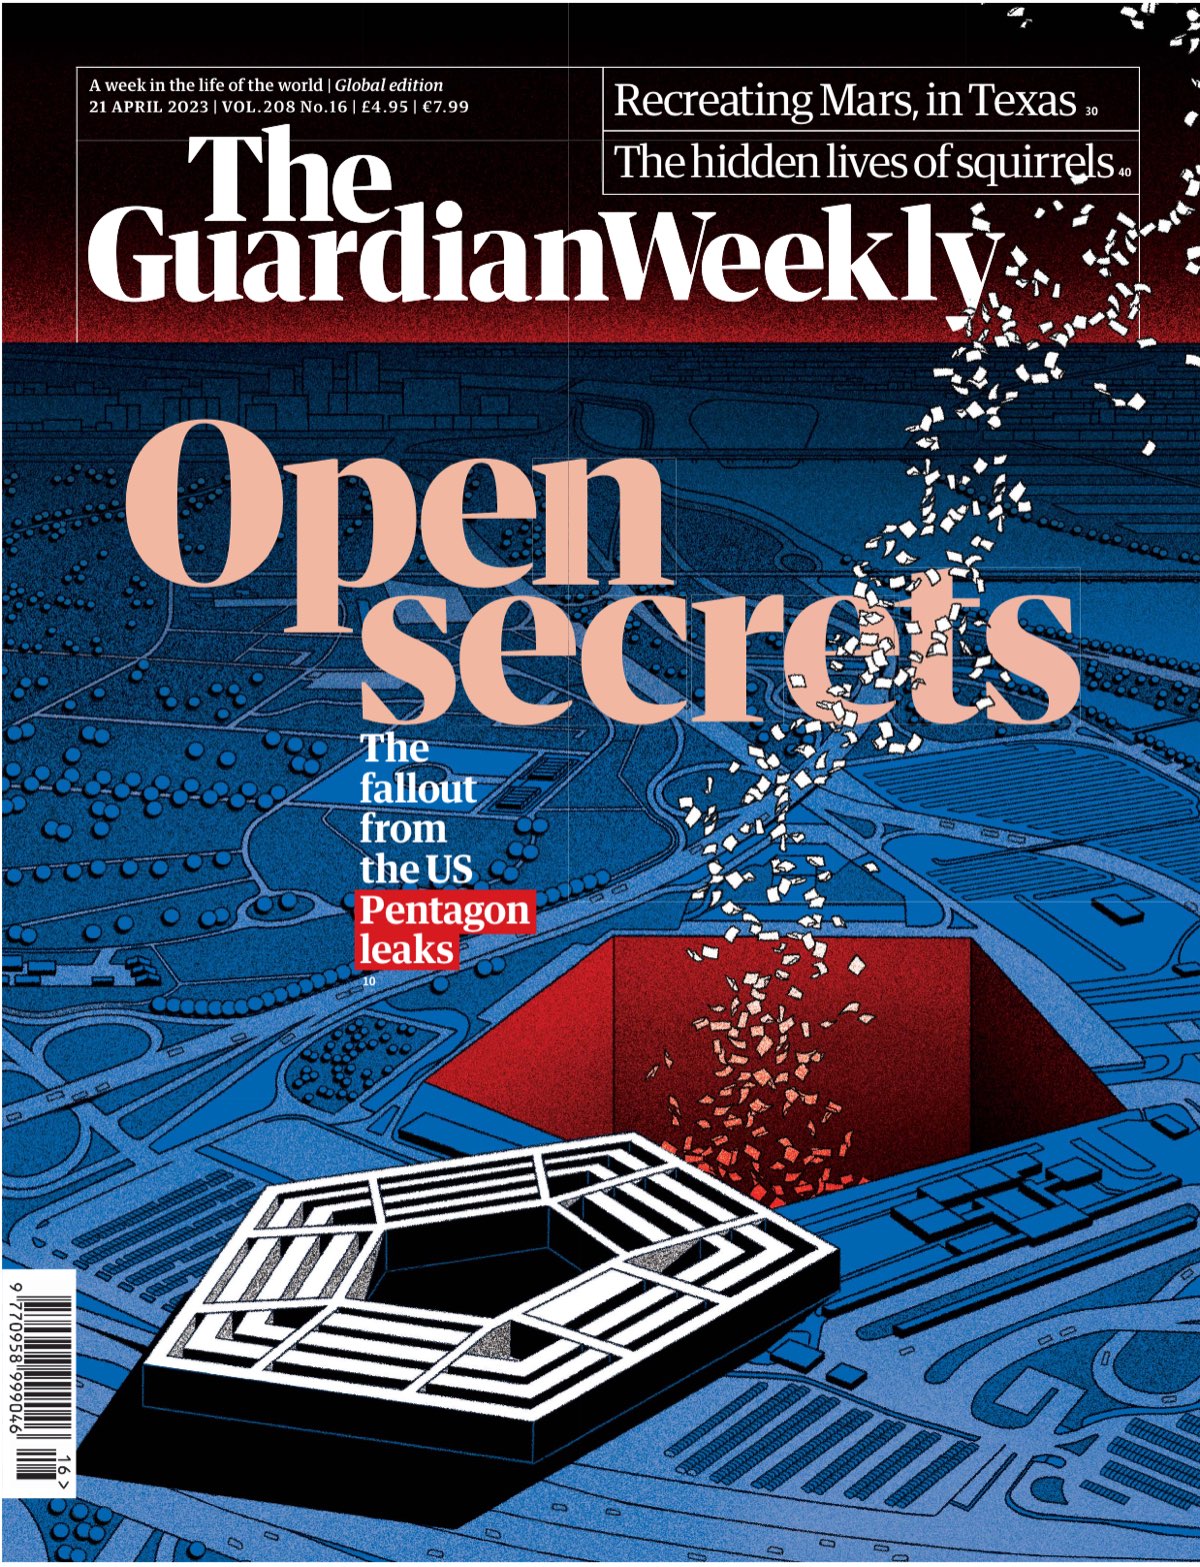 The Guardian Weekly - Vol. 208 No. 16 [21 Apr 2023]